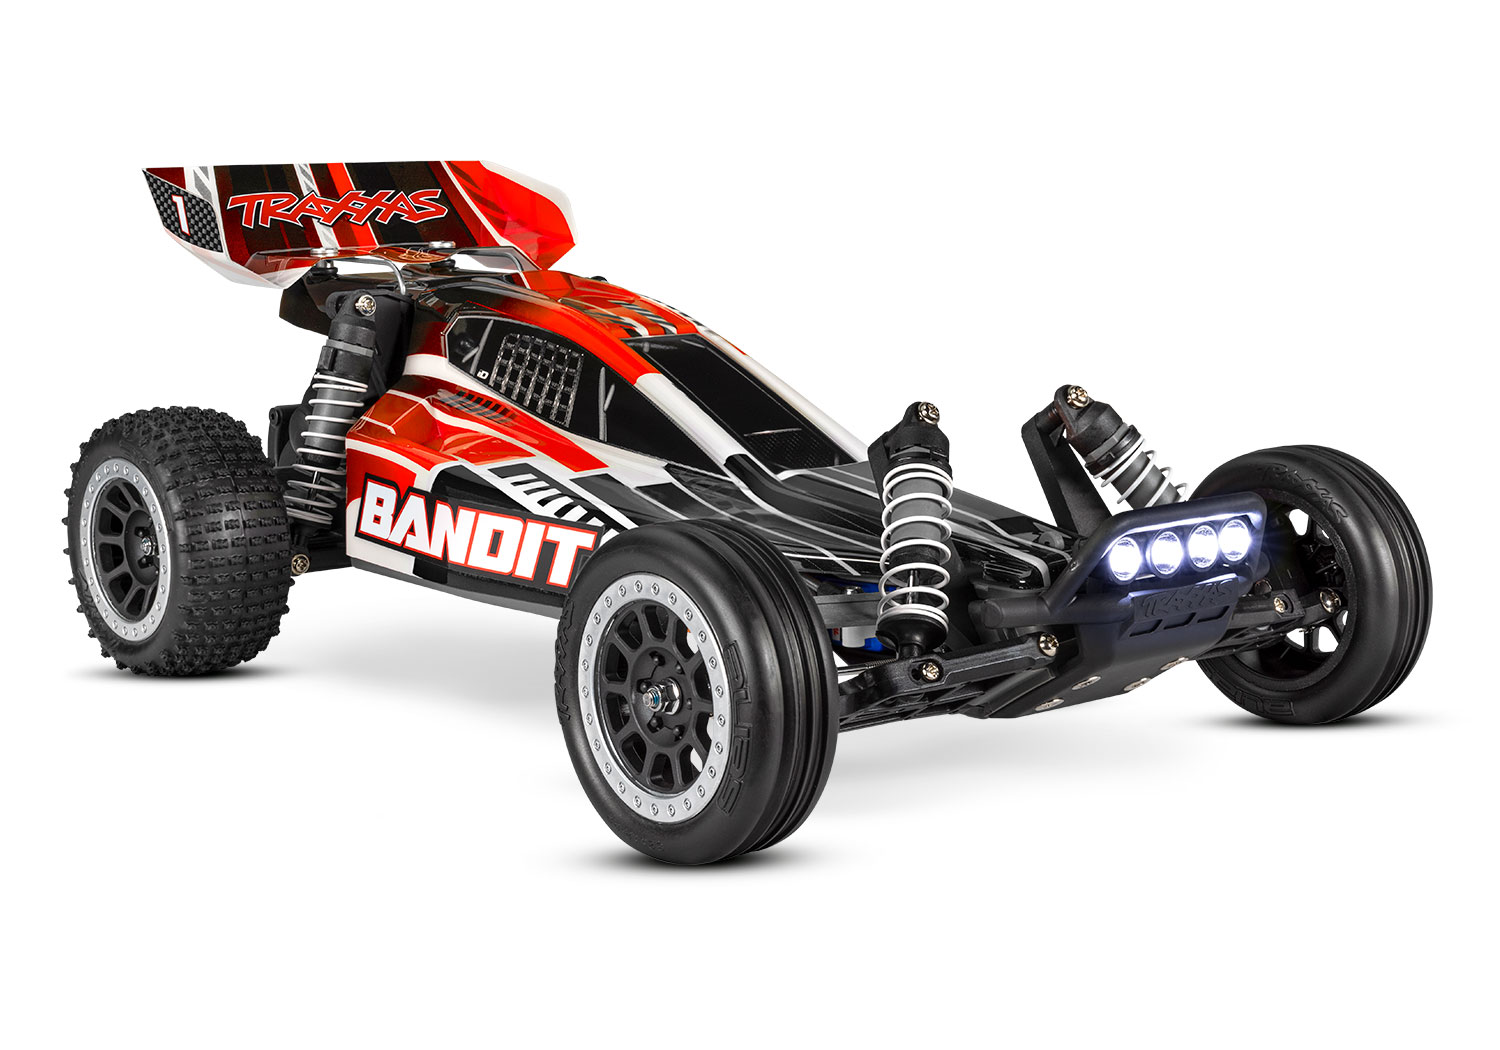 Traxxas Bandit XL5 2WD electro buggy RTR 2.4Ghz met LED verlichting inclusief Power Pack - Rood/Zwart